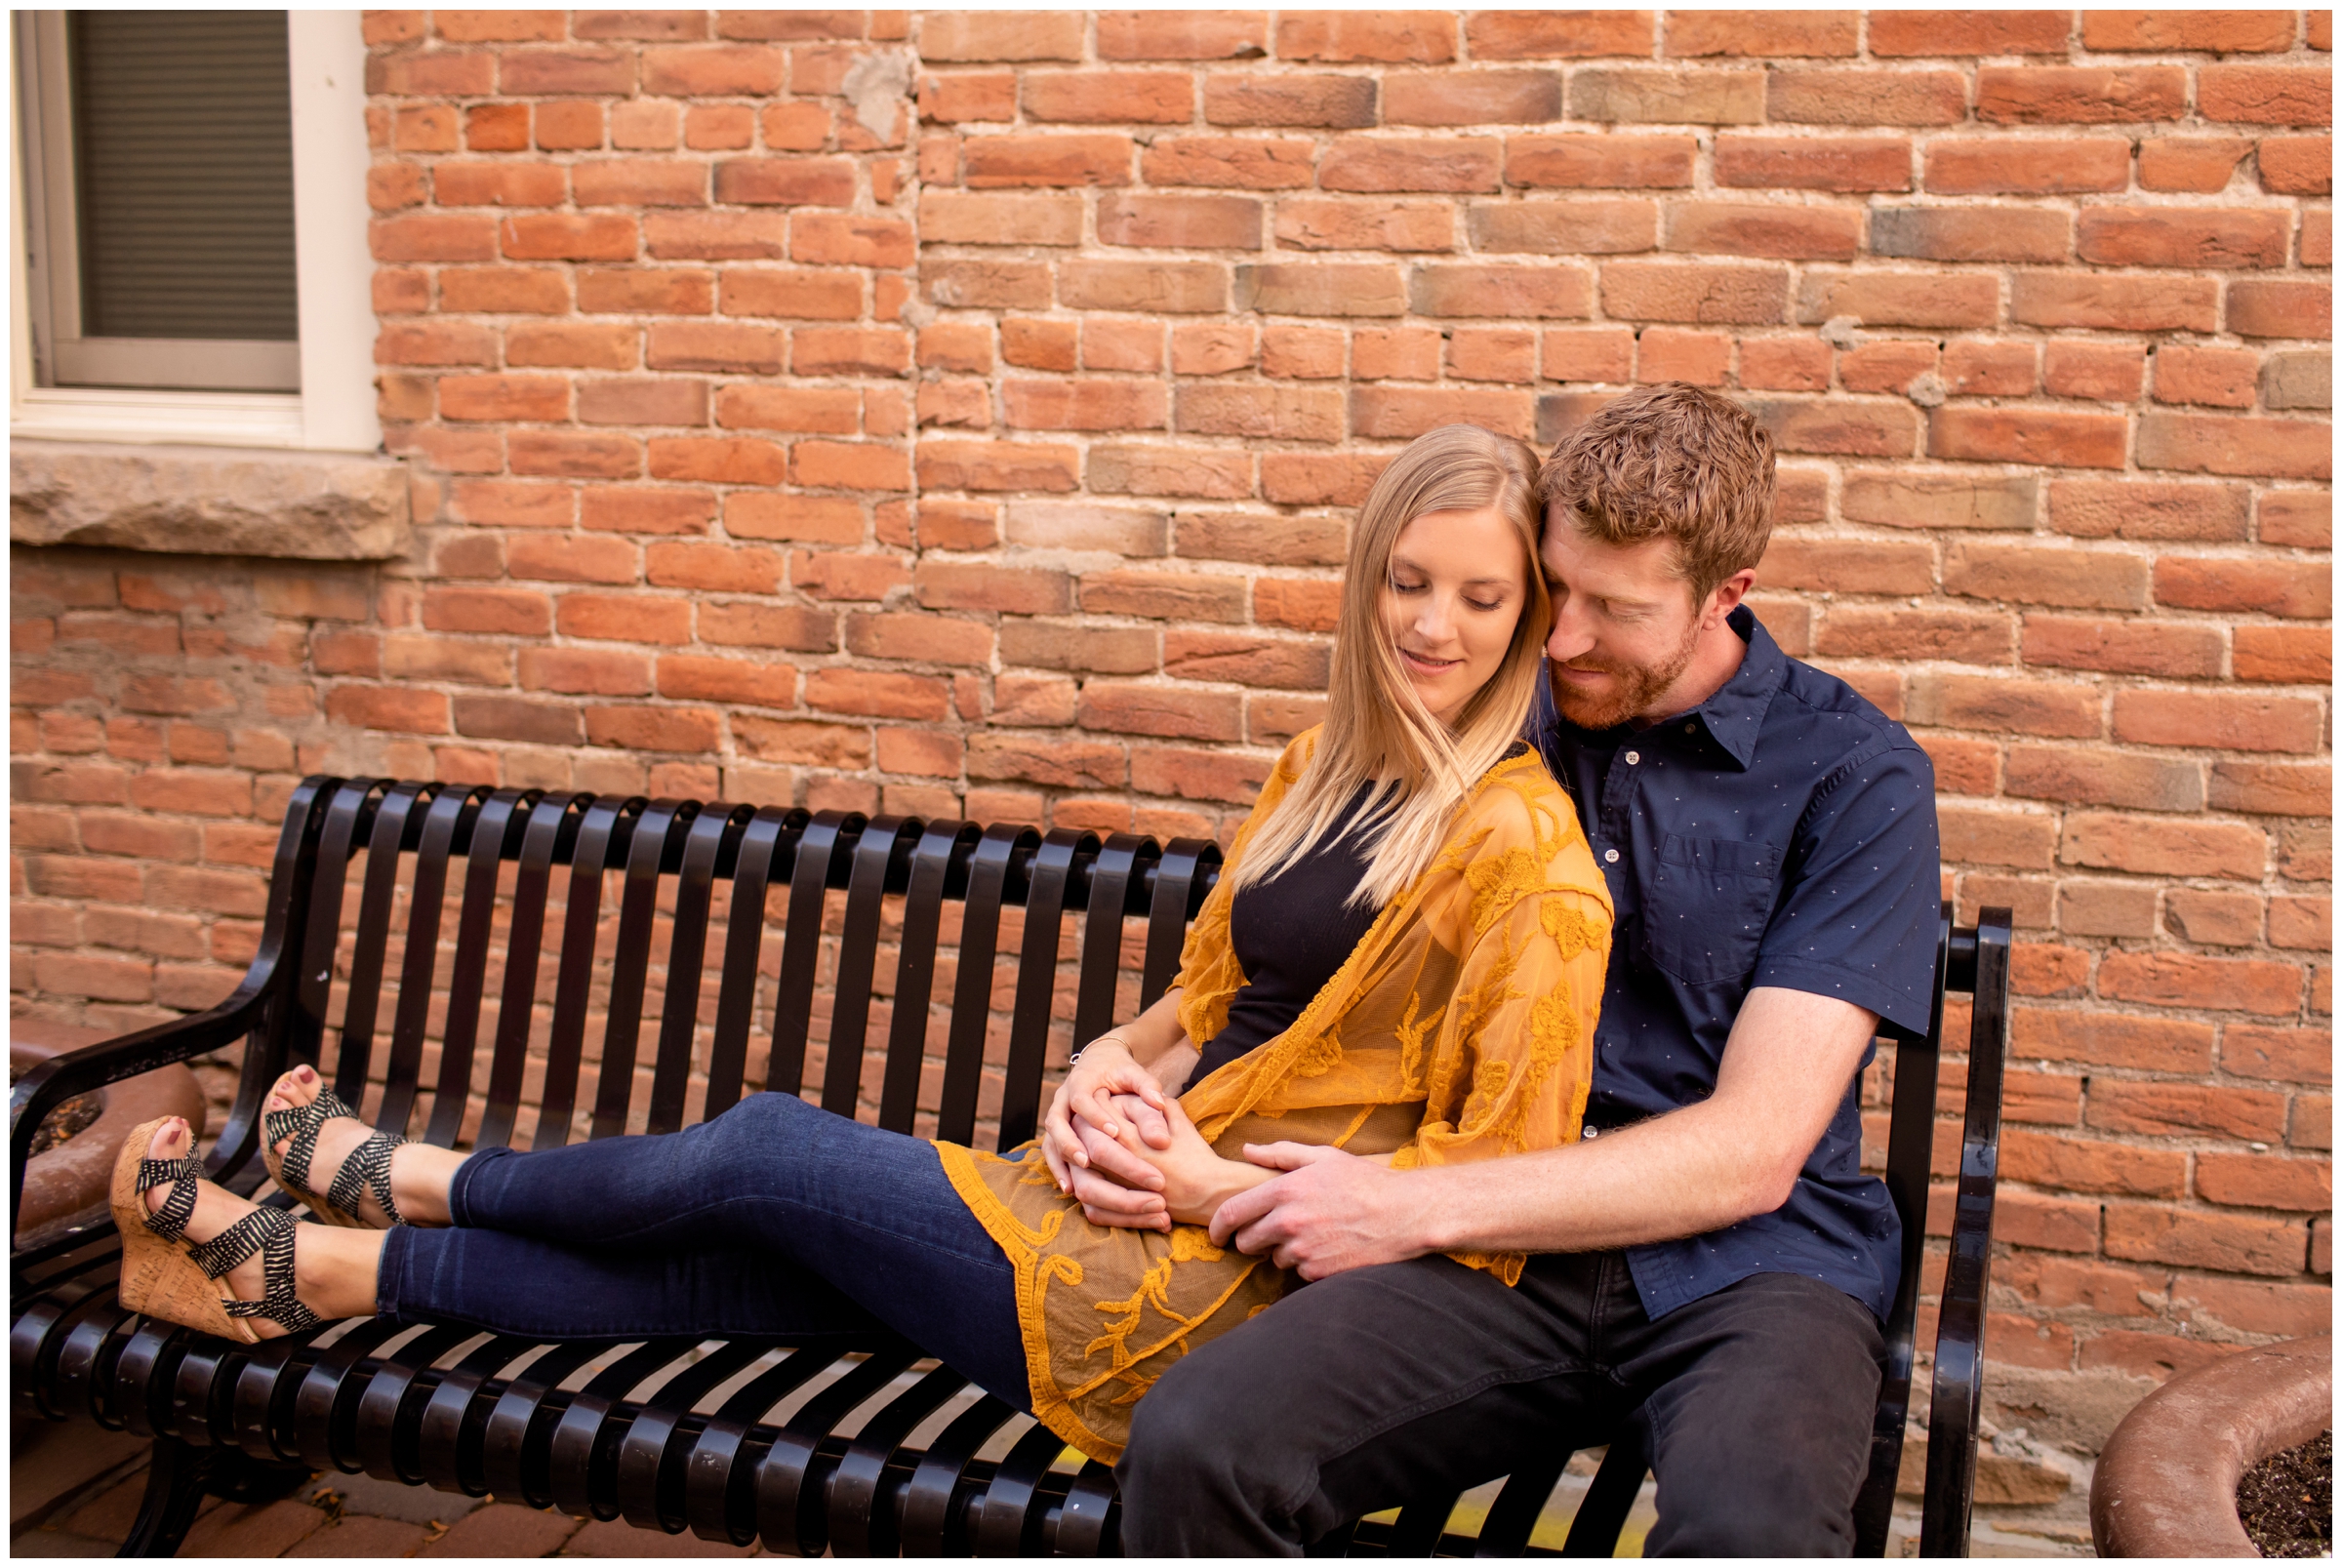 fiancées cuddling on bench during Colorado couples photo shoot